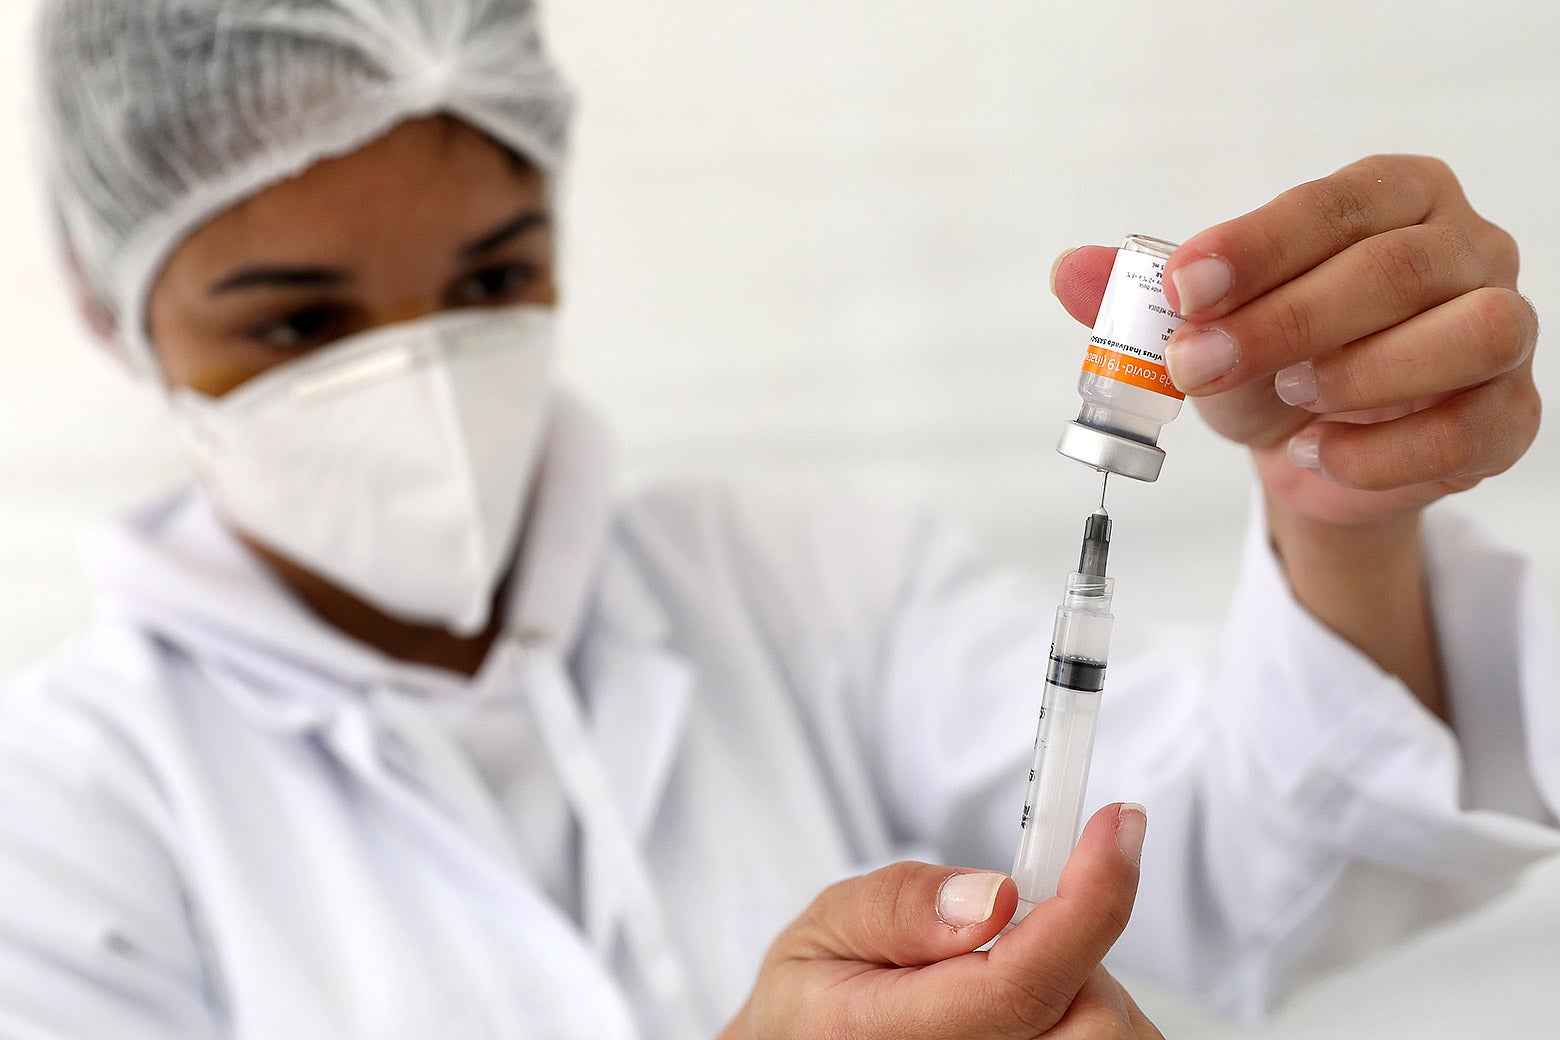 A masked health-care worker, wearing all white, fills a syringe with a vaccine.